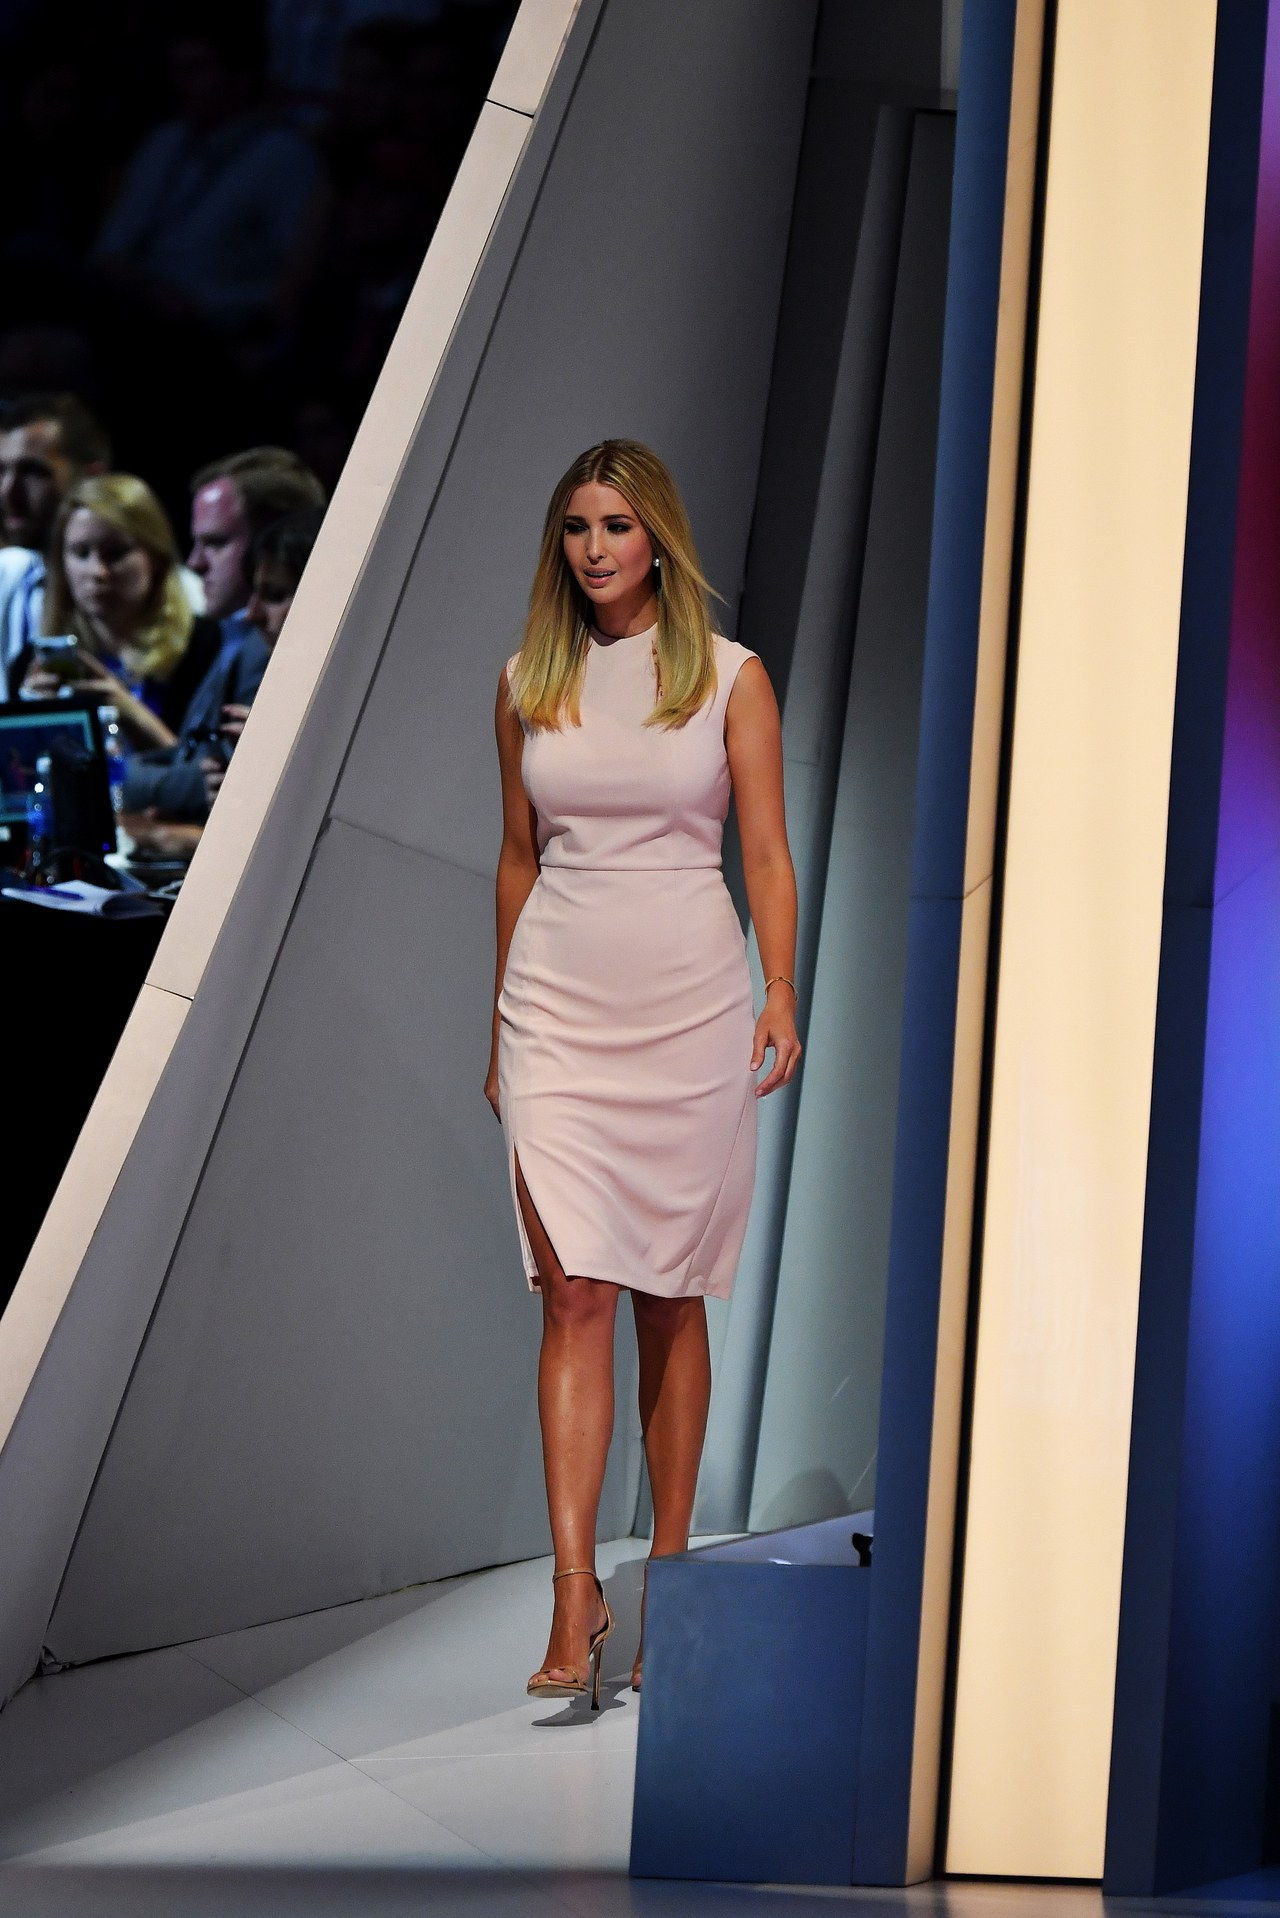 CLEVELAND， OH - JULY 21: Ivanka Trump walks on stage to deliver a speech during the evening session on the fourth day of the Republican National Convention on July 21, 2016 at the Quicken Loans Arena in Cleveland, Ohio. Republican presidential candidate Donald Trump received the number of votes needed to secure the party's nomination. An estimated 50,000 people are expected in Cleveland, including hundreds of protesters and members of the media. The four-day Republican National Convention kicked off on July 18. (Photo by Jeff J Mitchell/Getty Images)